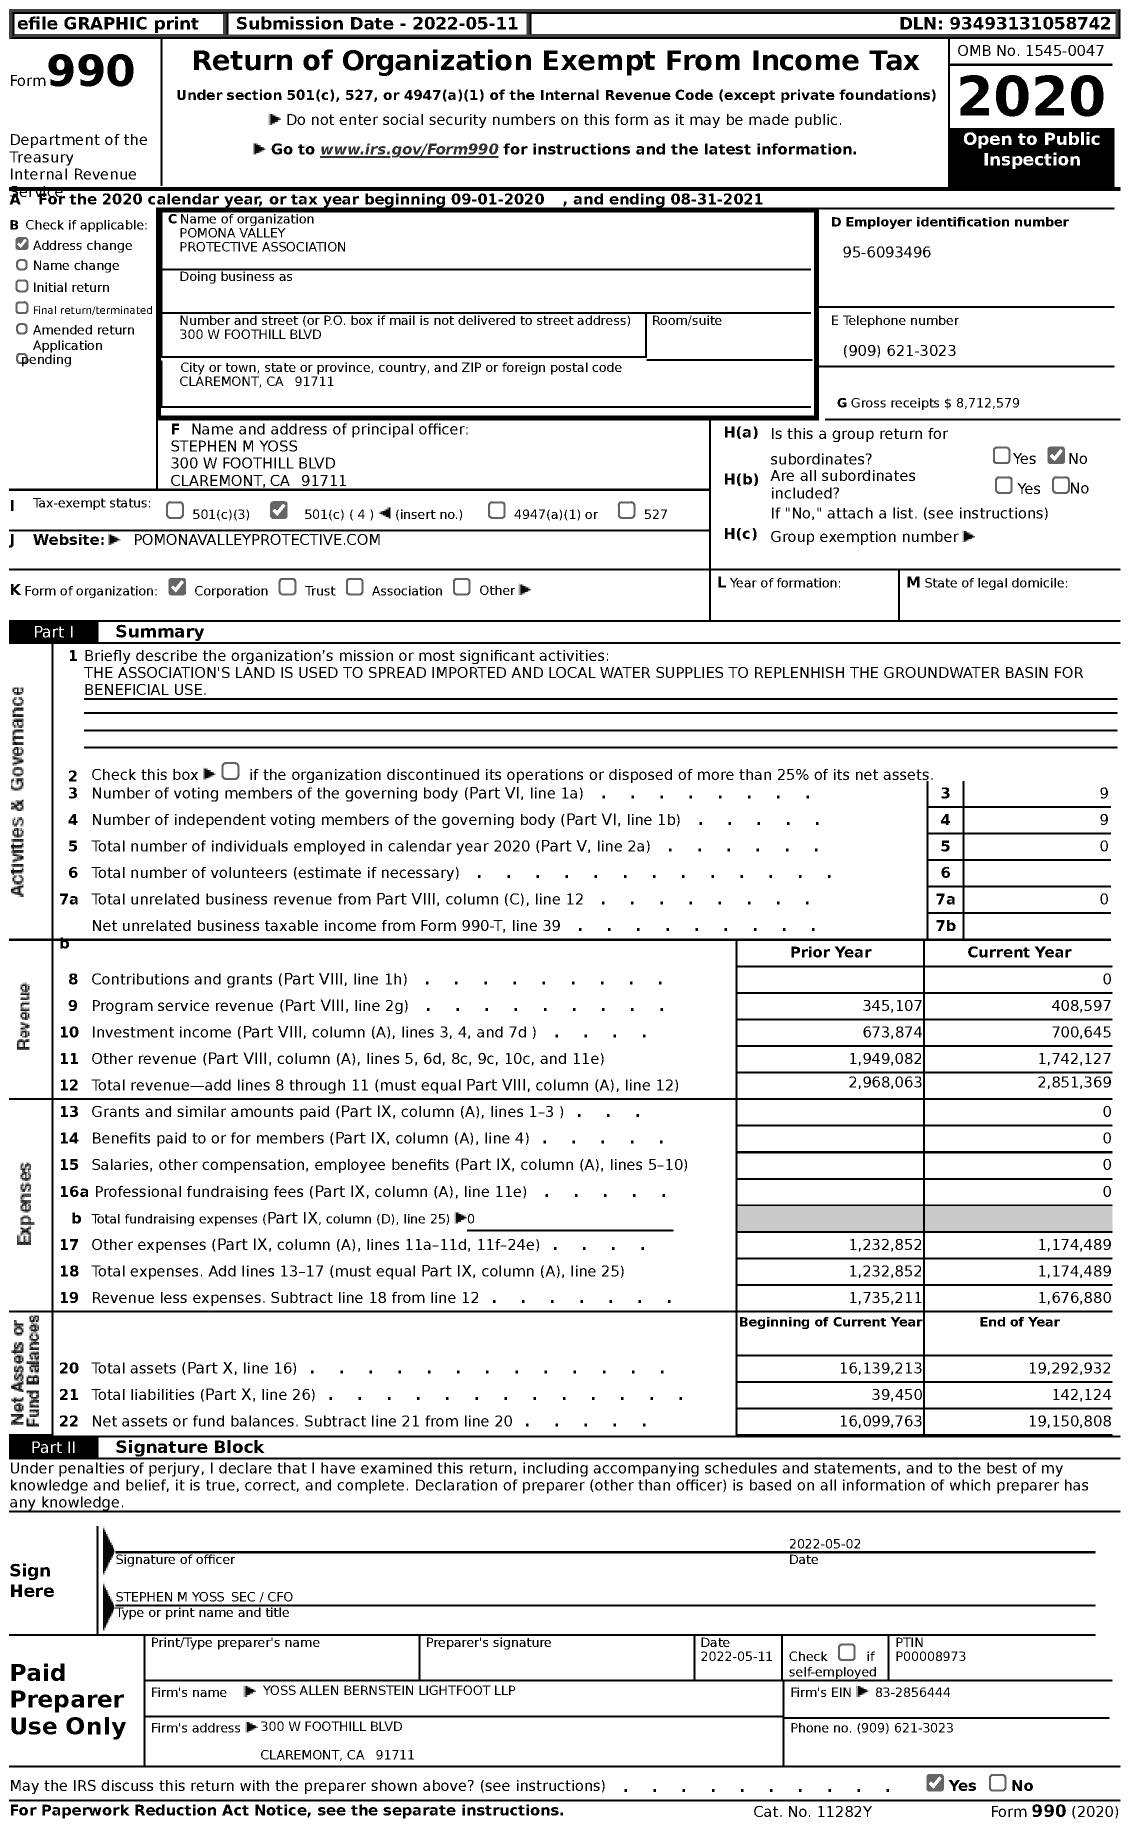 Image of first page of 2020 Form 990 for Pomona Valley Protective Association (PVPA)